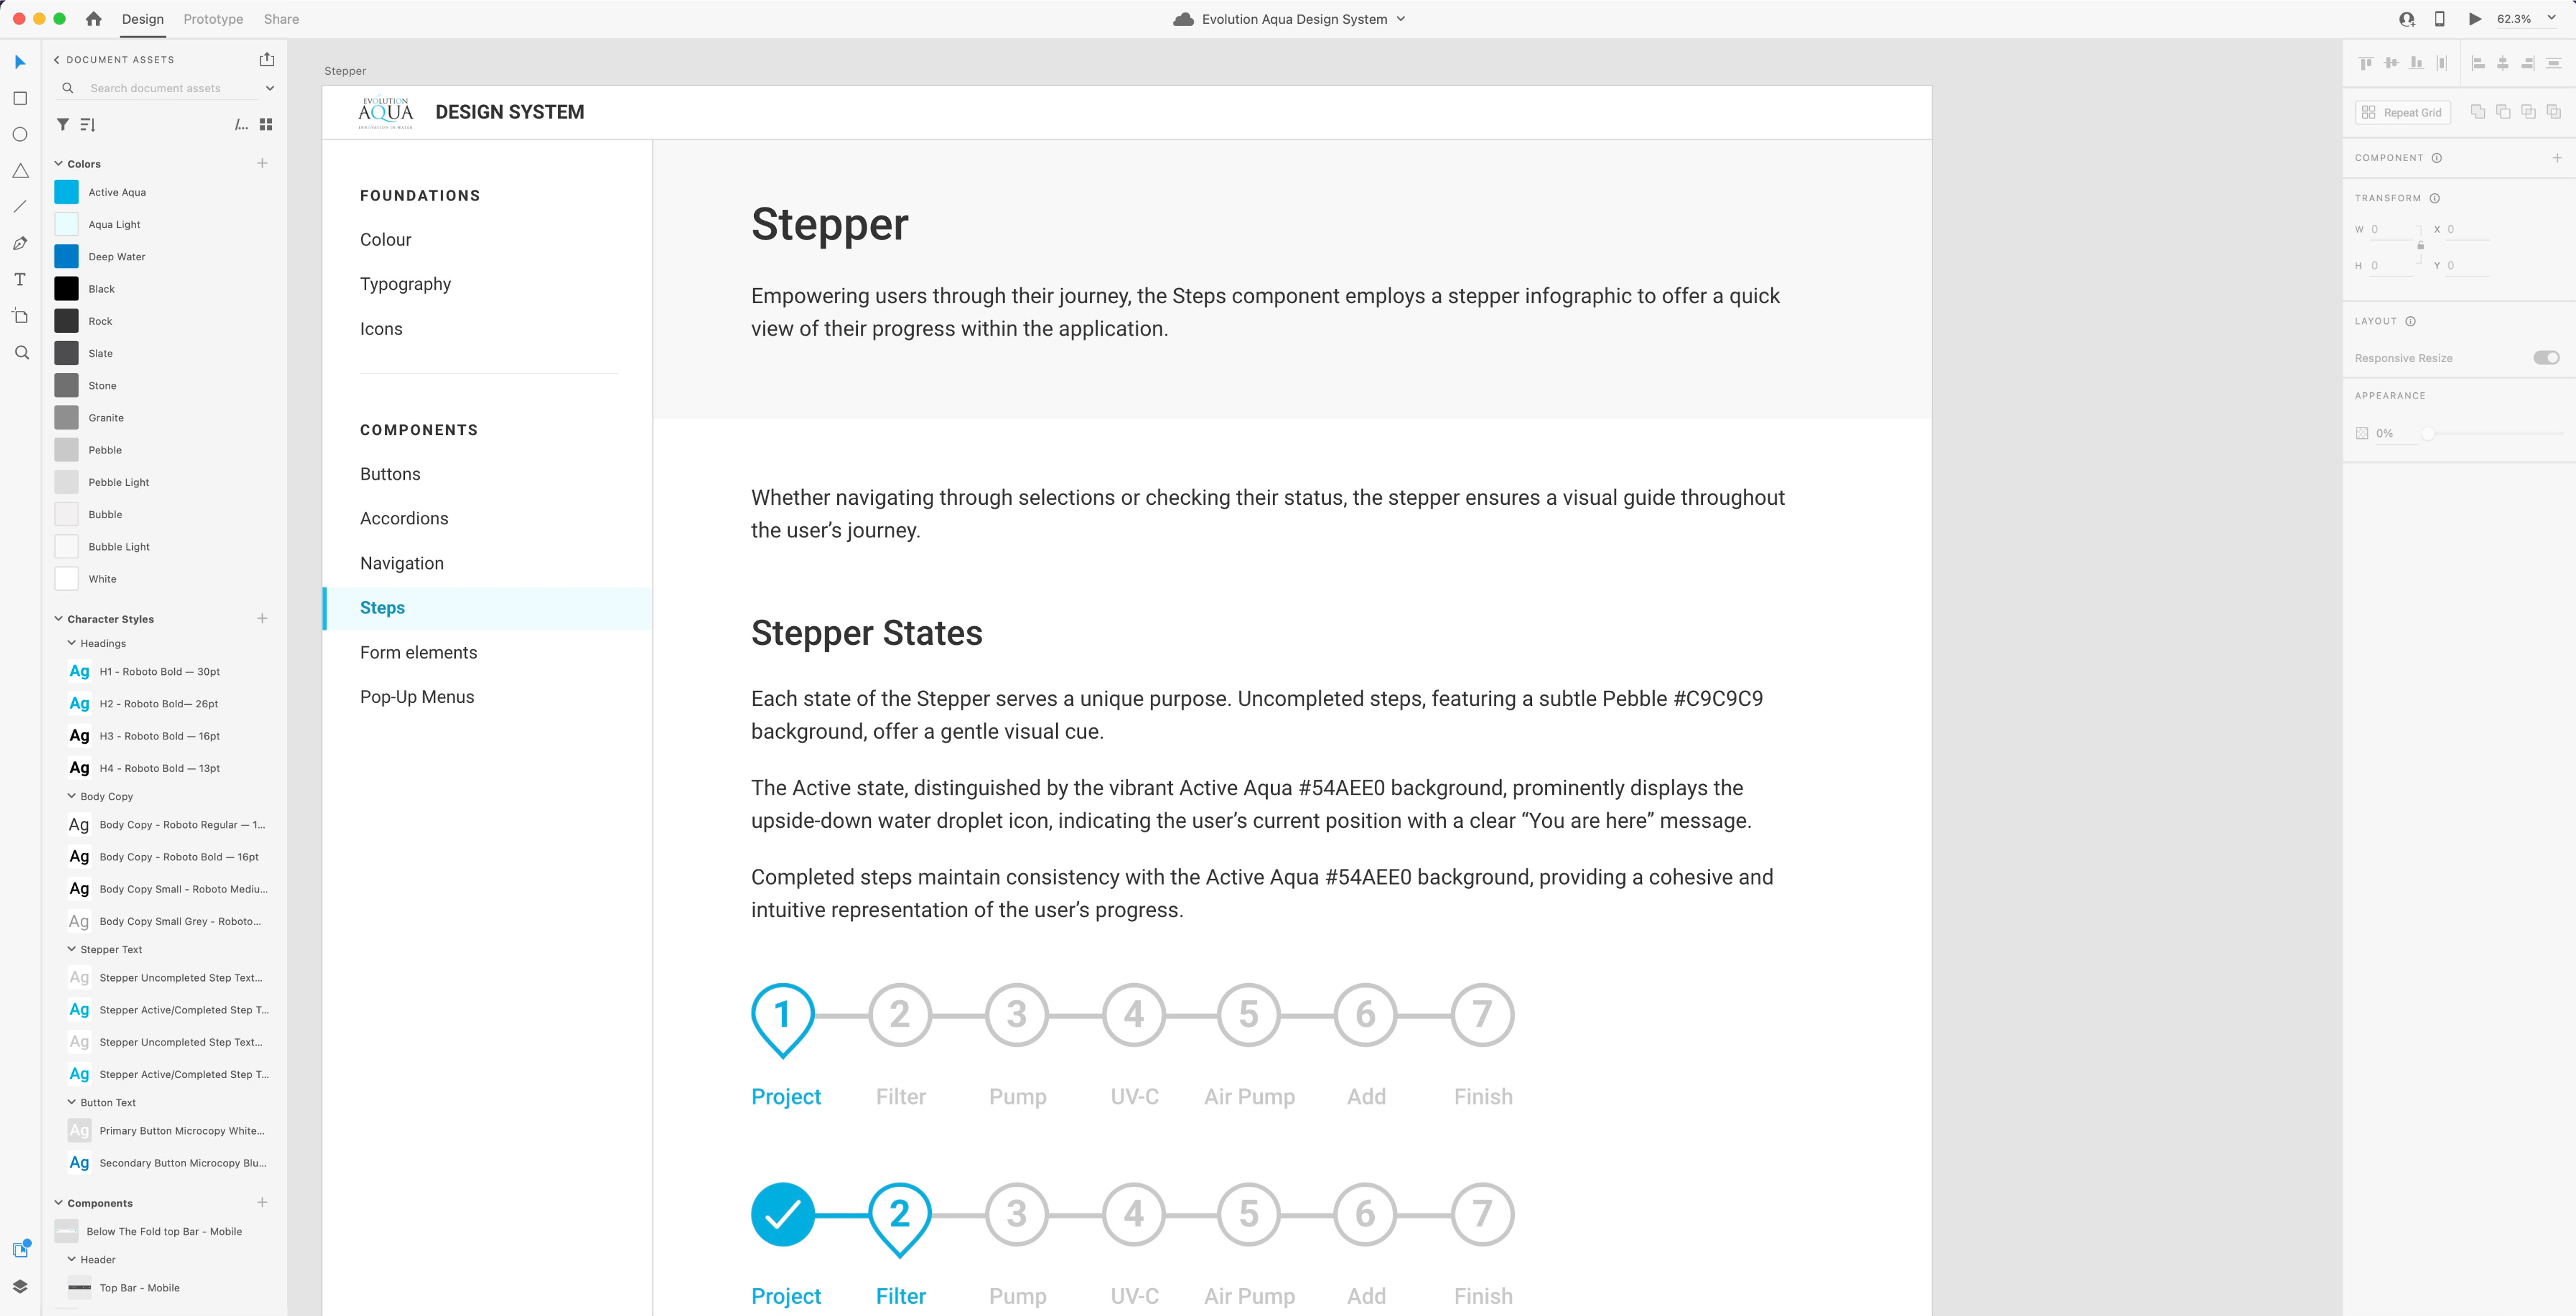 Image showing a page of Stepper of the design system.